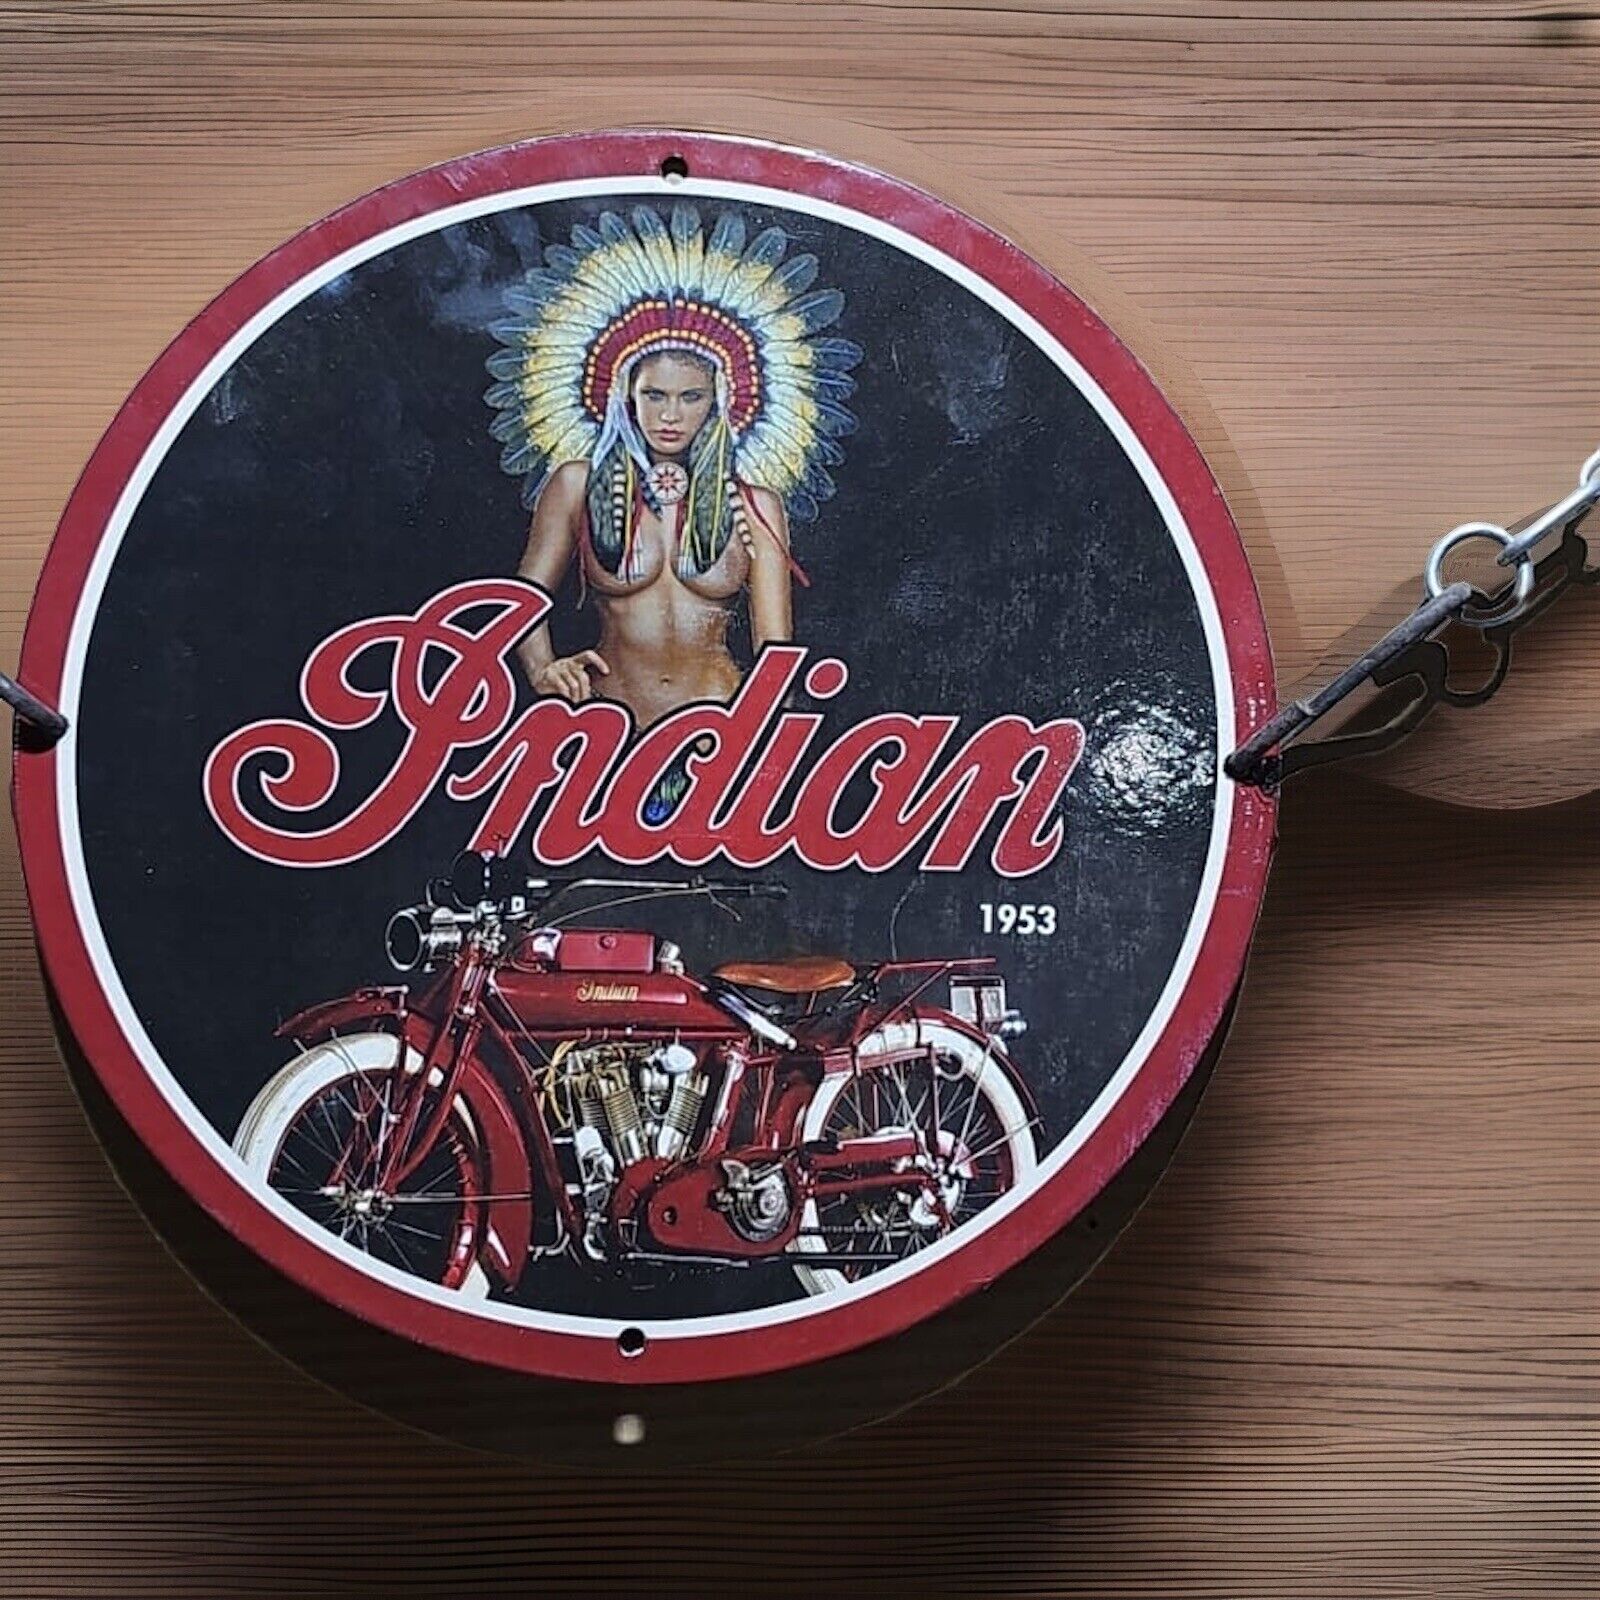 INDIAN MOTORCYCLE PINUP GIRL PORCELAIN GAS OIL GARAGE SERVICE AUTO PUMP AD SIGN